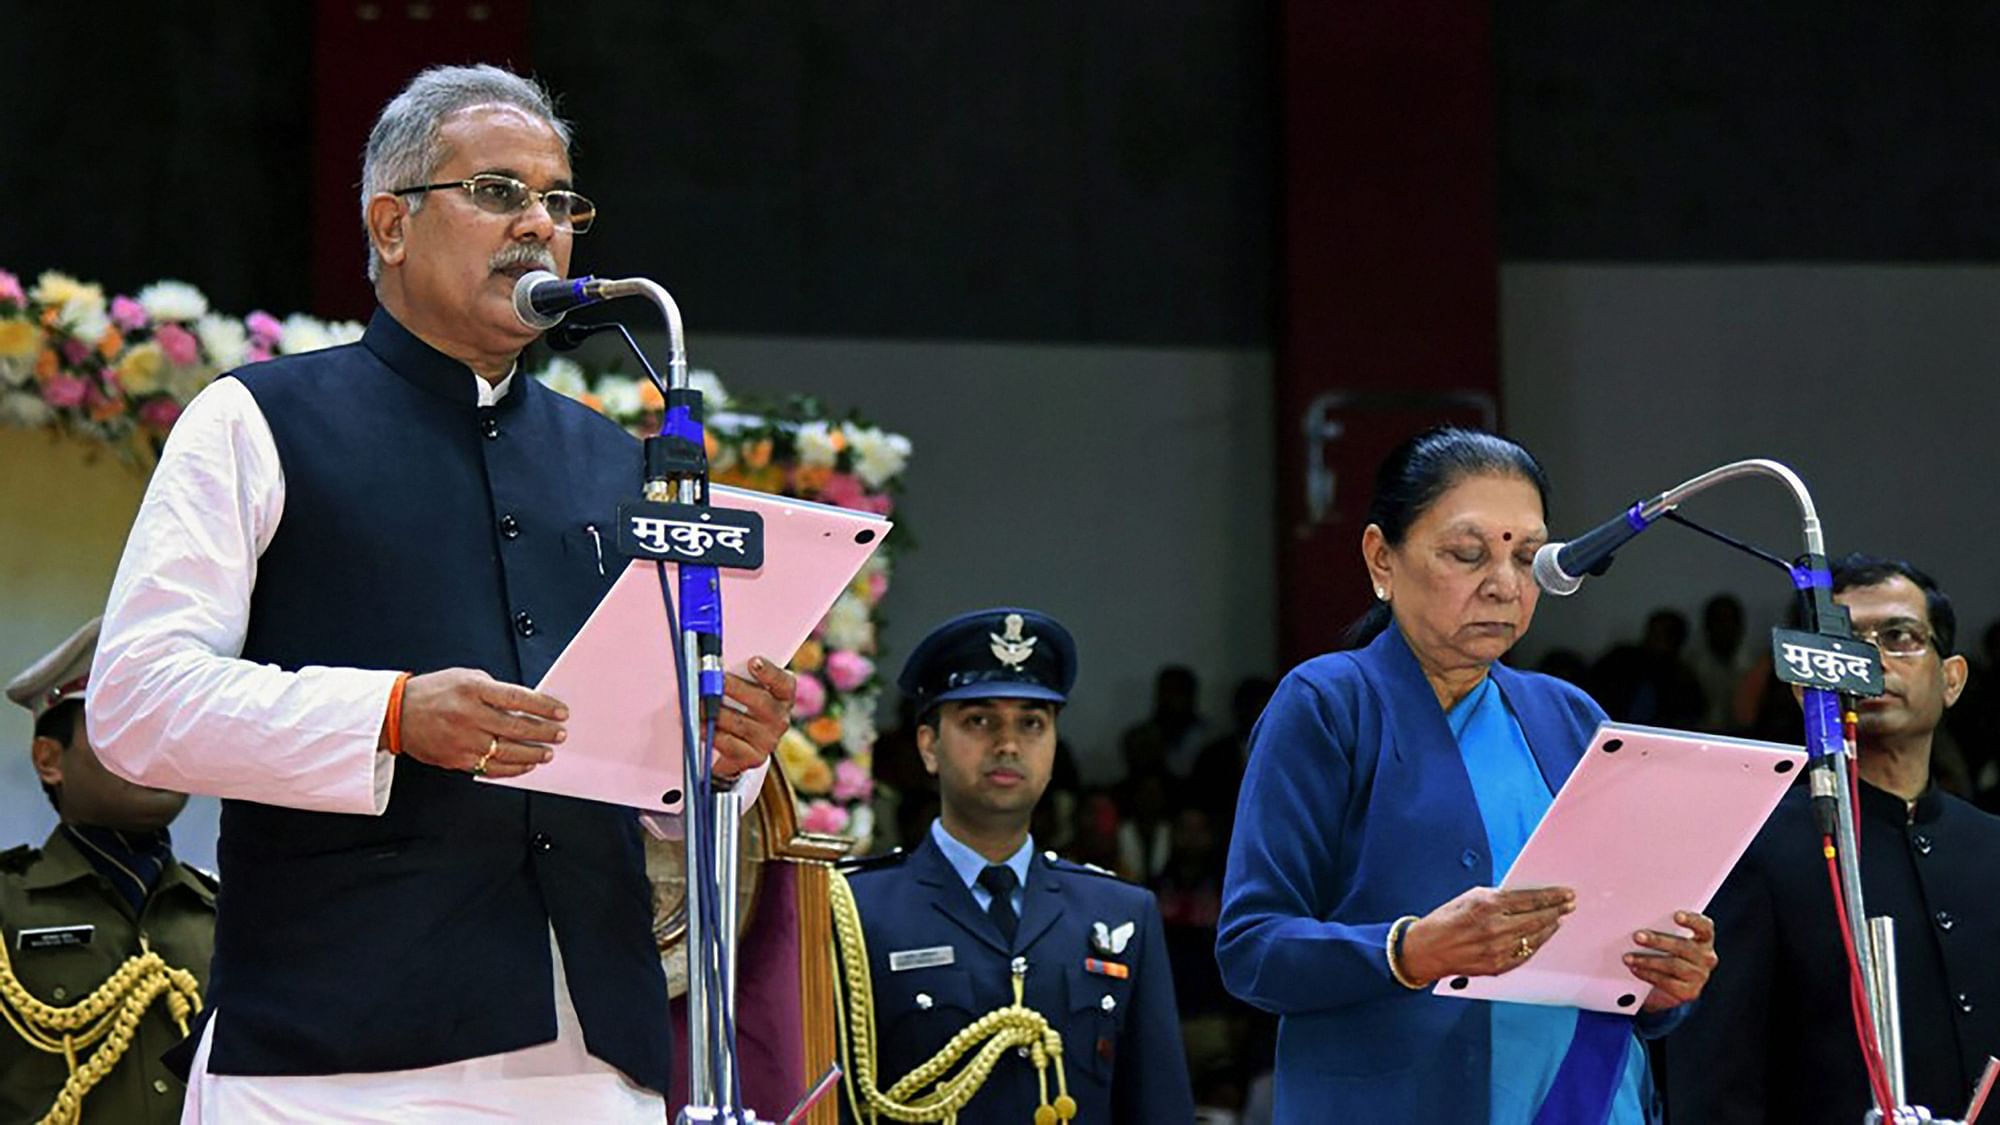 Chhattisgarh Chief Minister Bhupesh Baghel being administered the oath of office by Governor Anandiben Patel during a swearing-in ceremony, in Raipur.